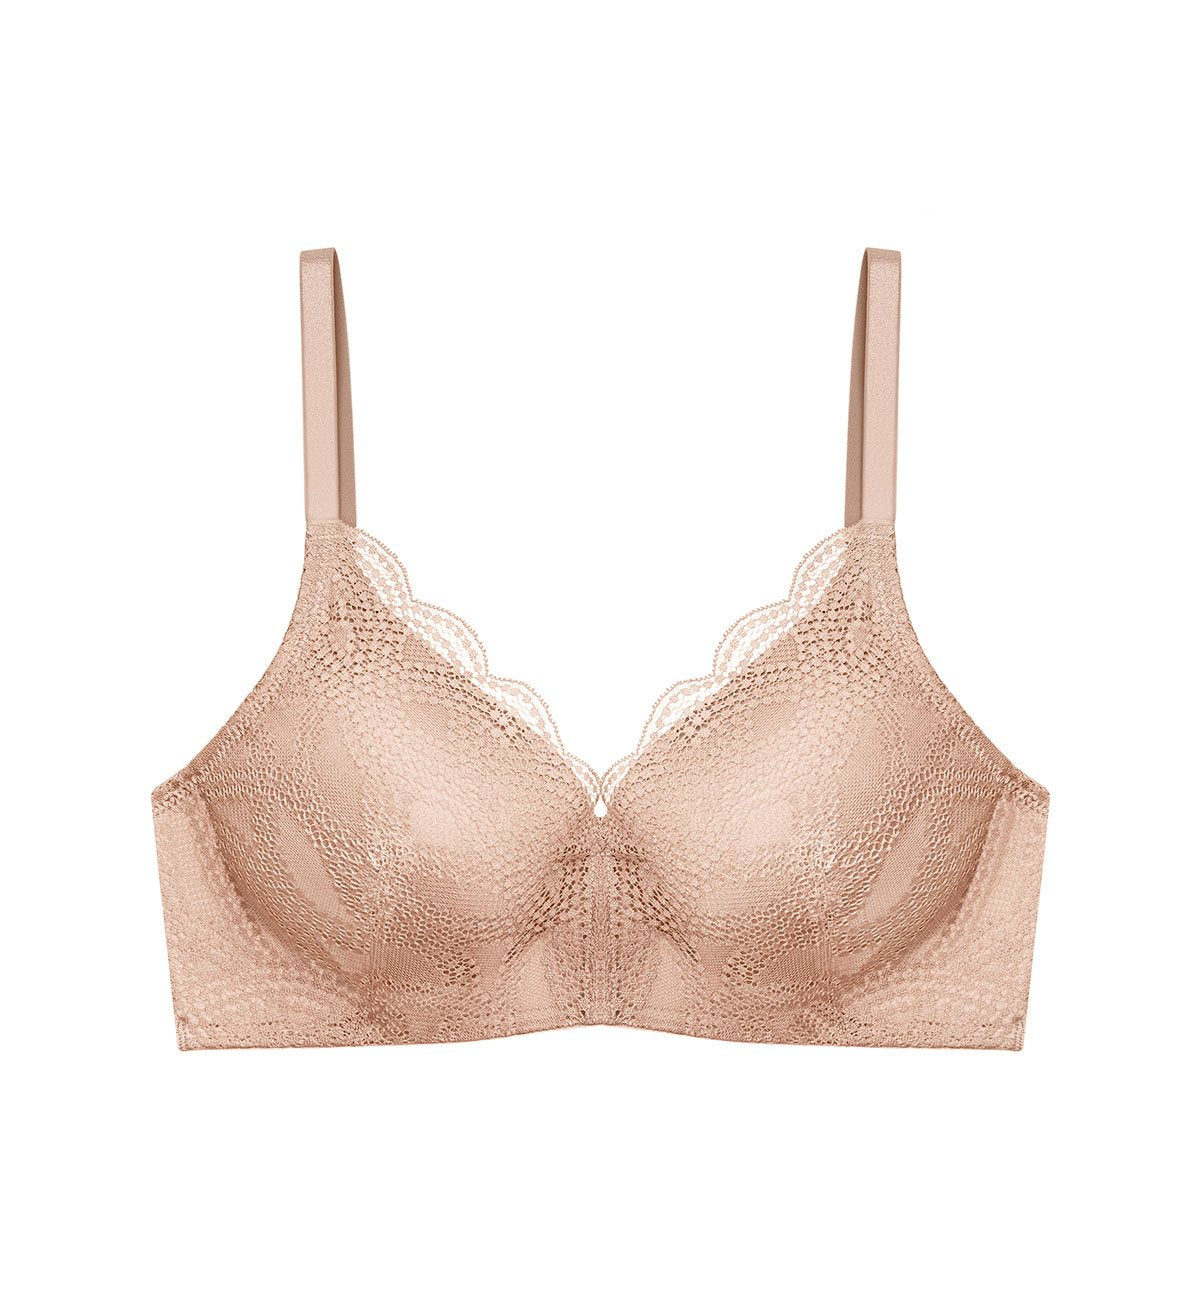 Modern Curvy Non-Wired Padded Bra 01 in Foundation Nude